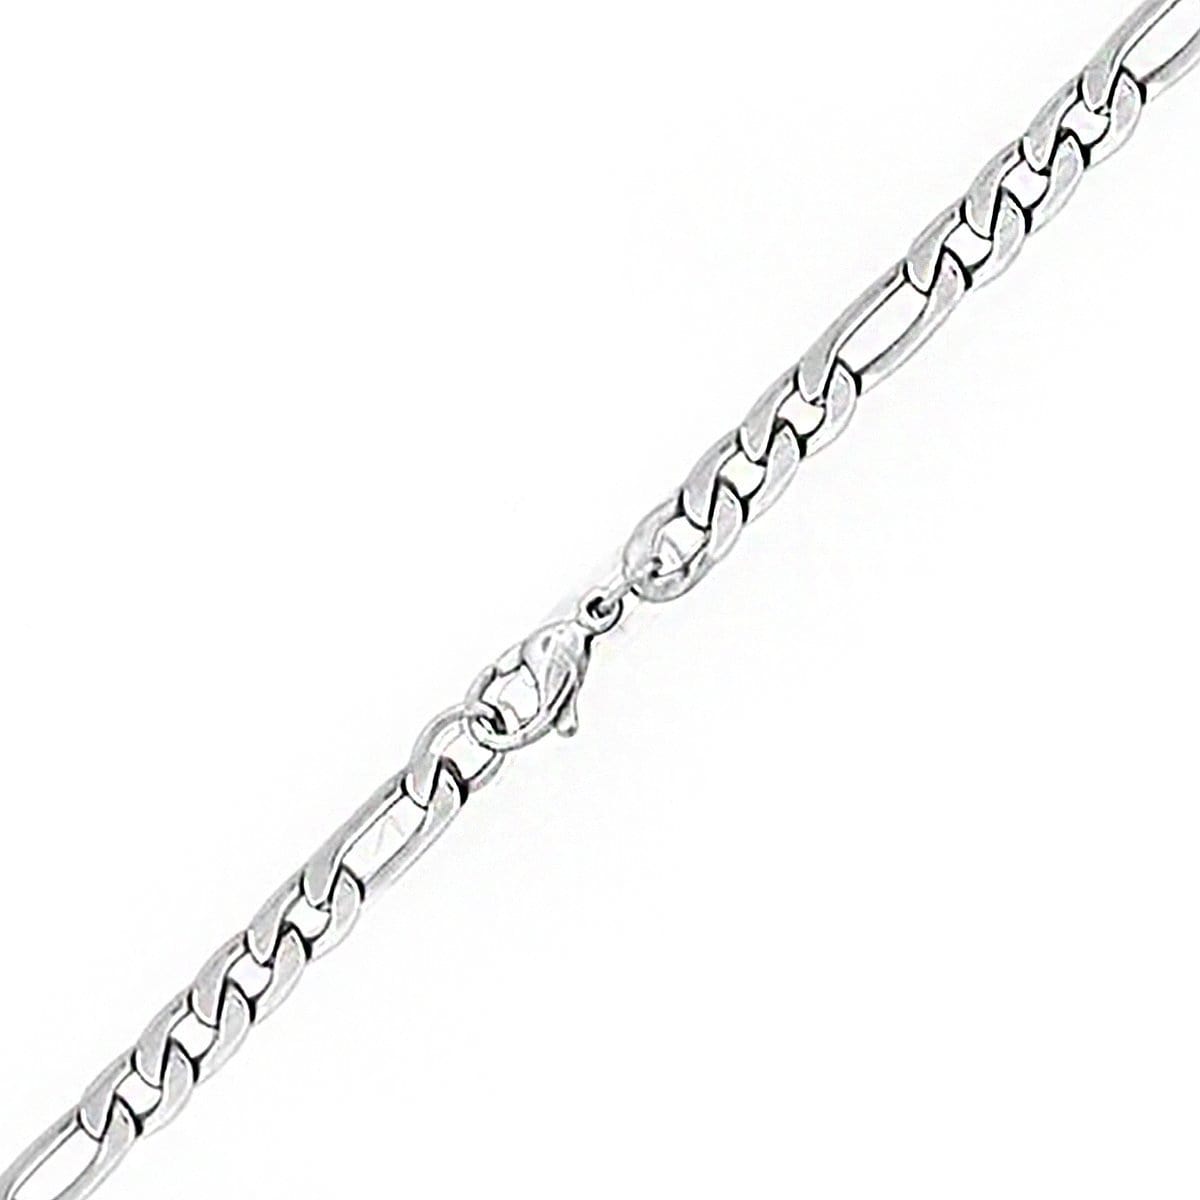 INOX JEWELRY Chains Silver Tone Stainless Steel 6mm Figaro Polished Chain